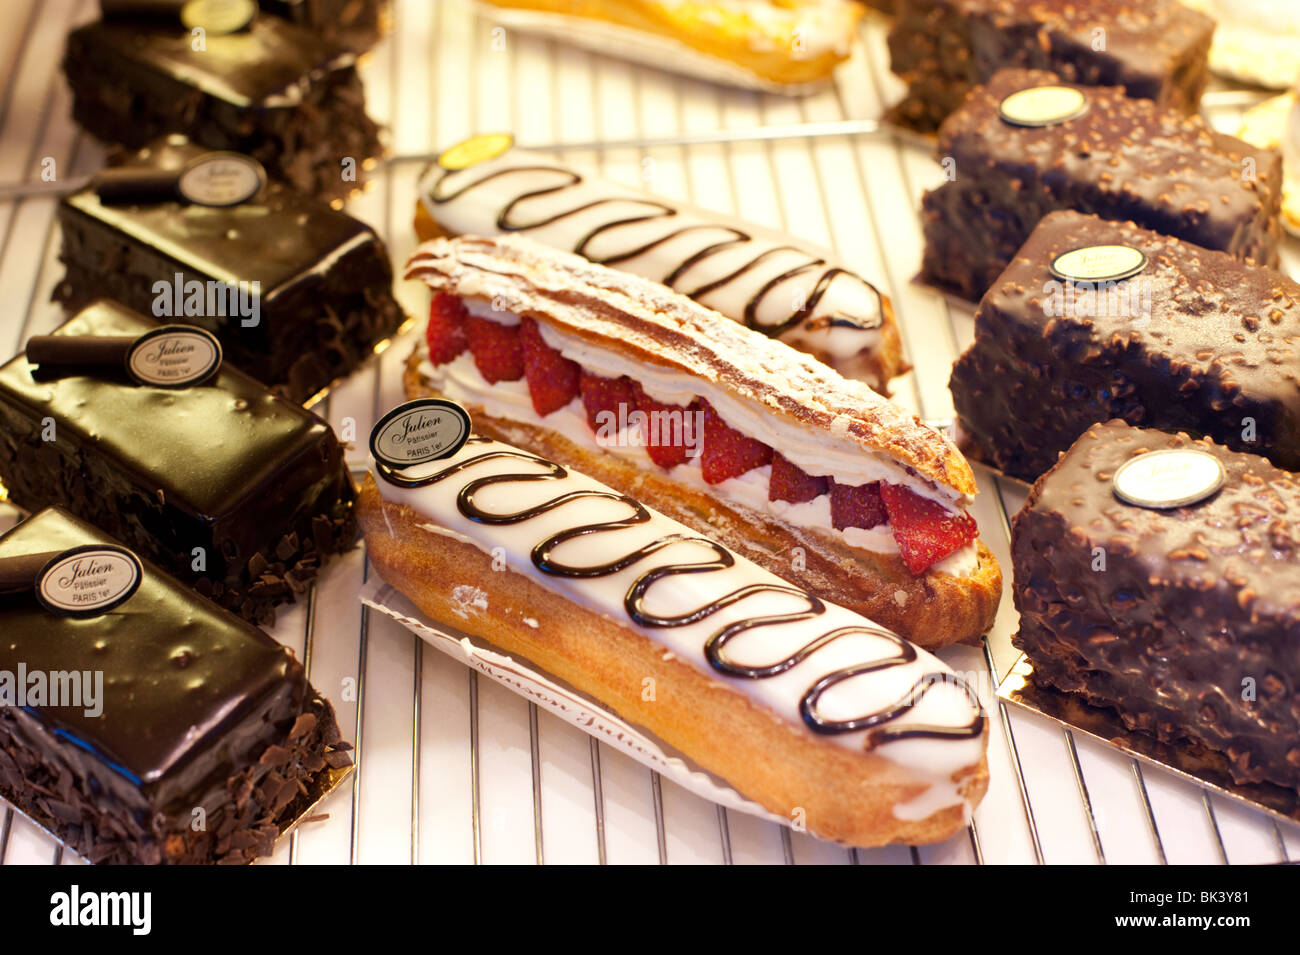 Eclairs with strawberries and chocolate pastries at a patissire in Paris, France Stock Photo